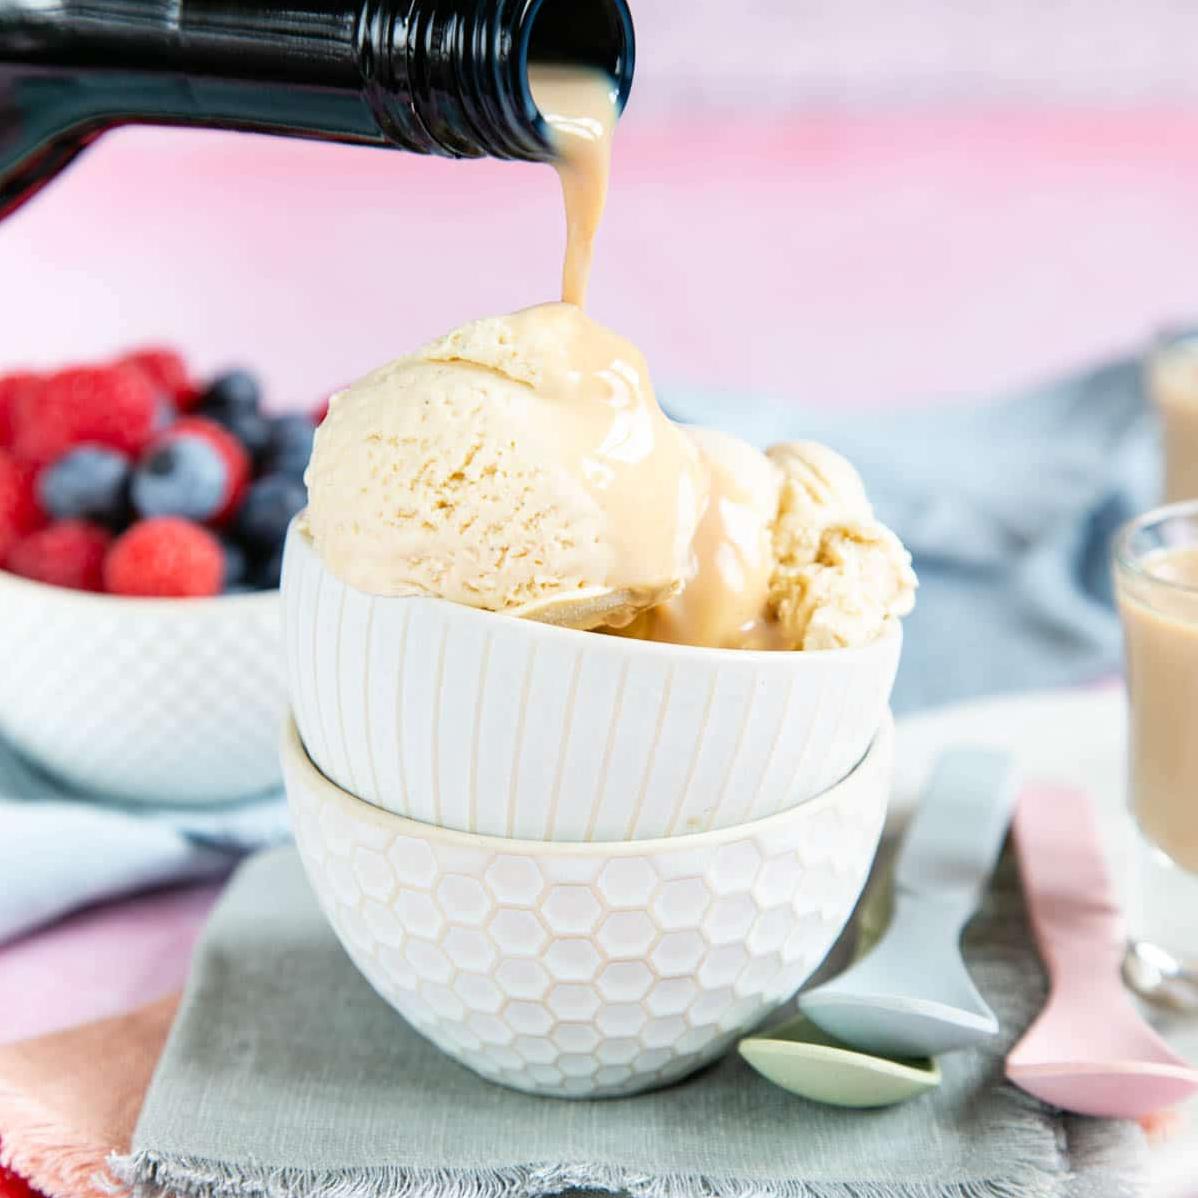  This frozen yogurt is the perfect dessert for those hot summer days.